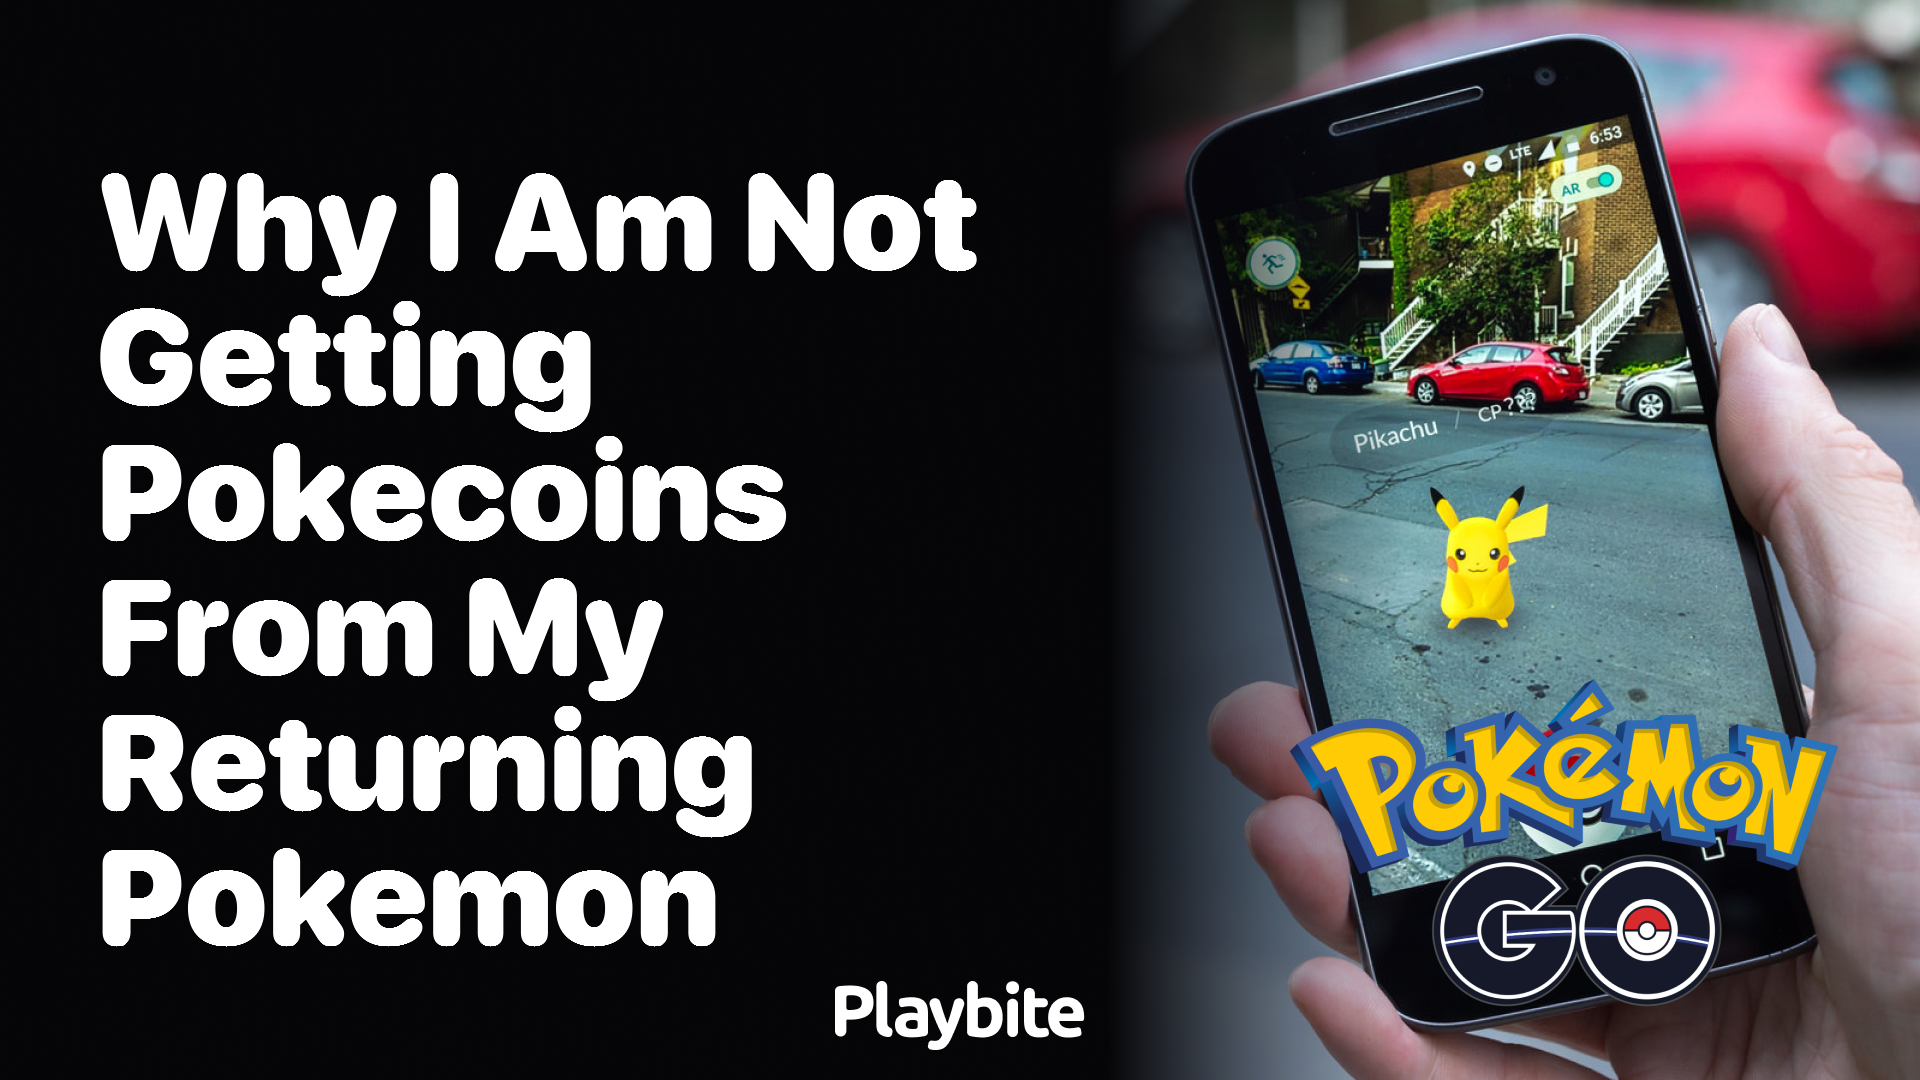 Why Am I Not Getting PokeCoins From My Returning Pokemon?